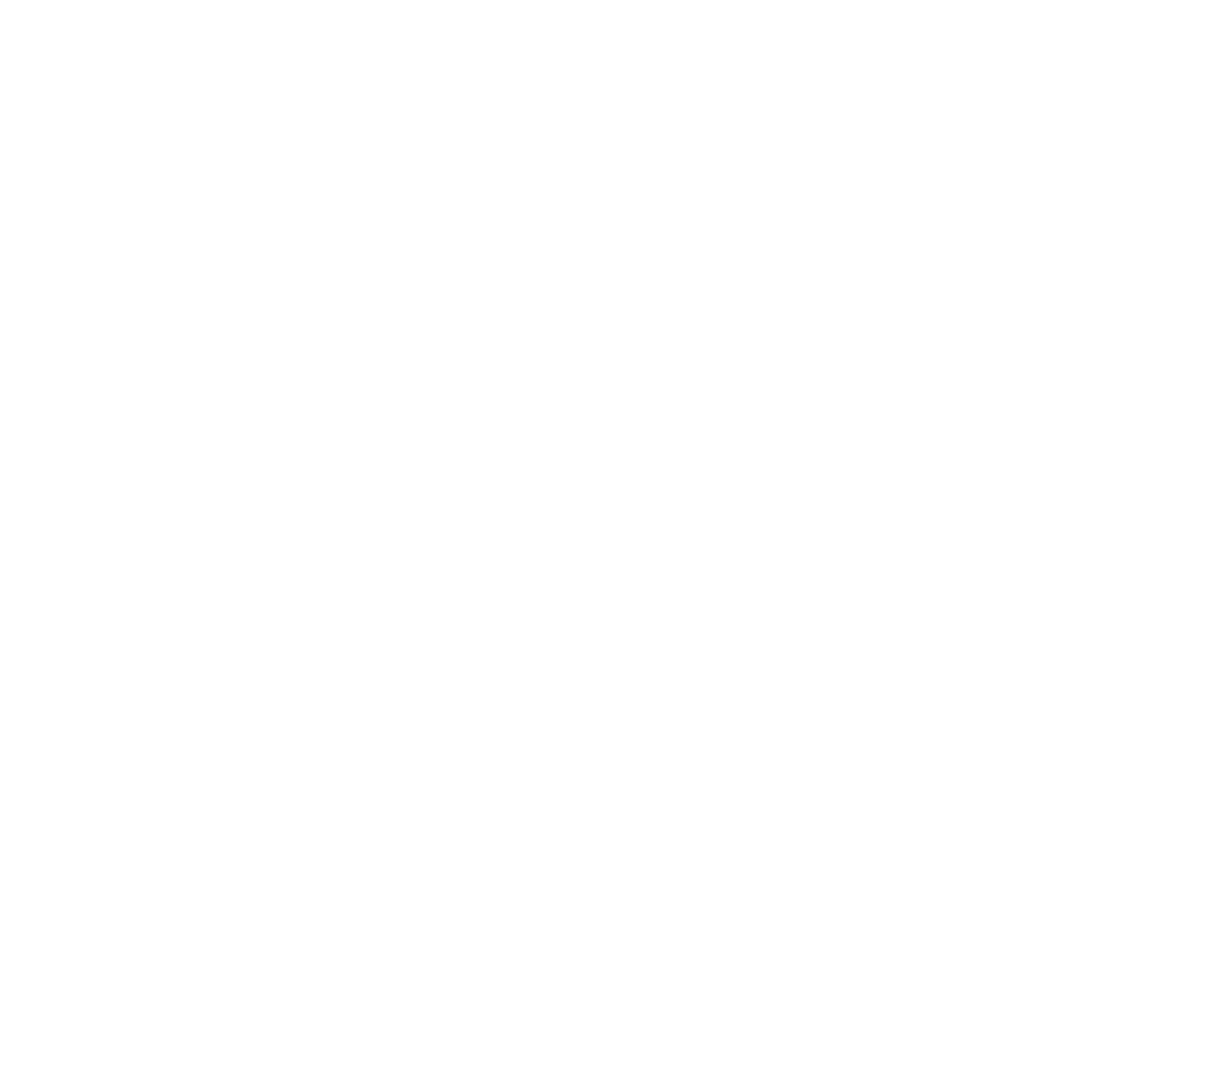 Handshake Moorepay and Natural HR coming together